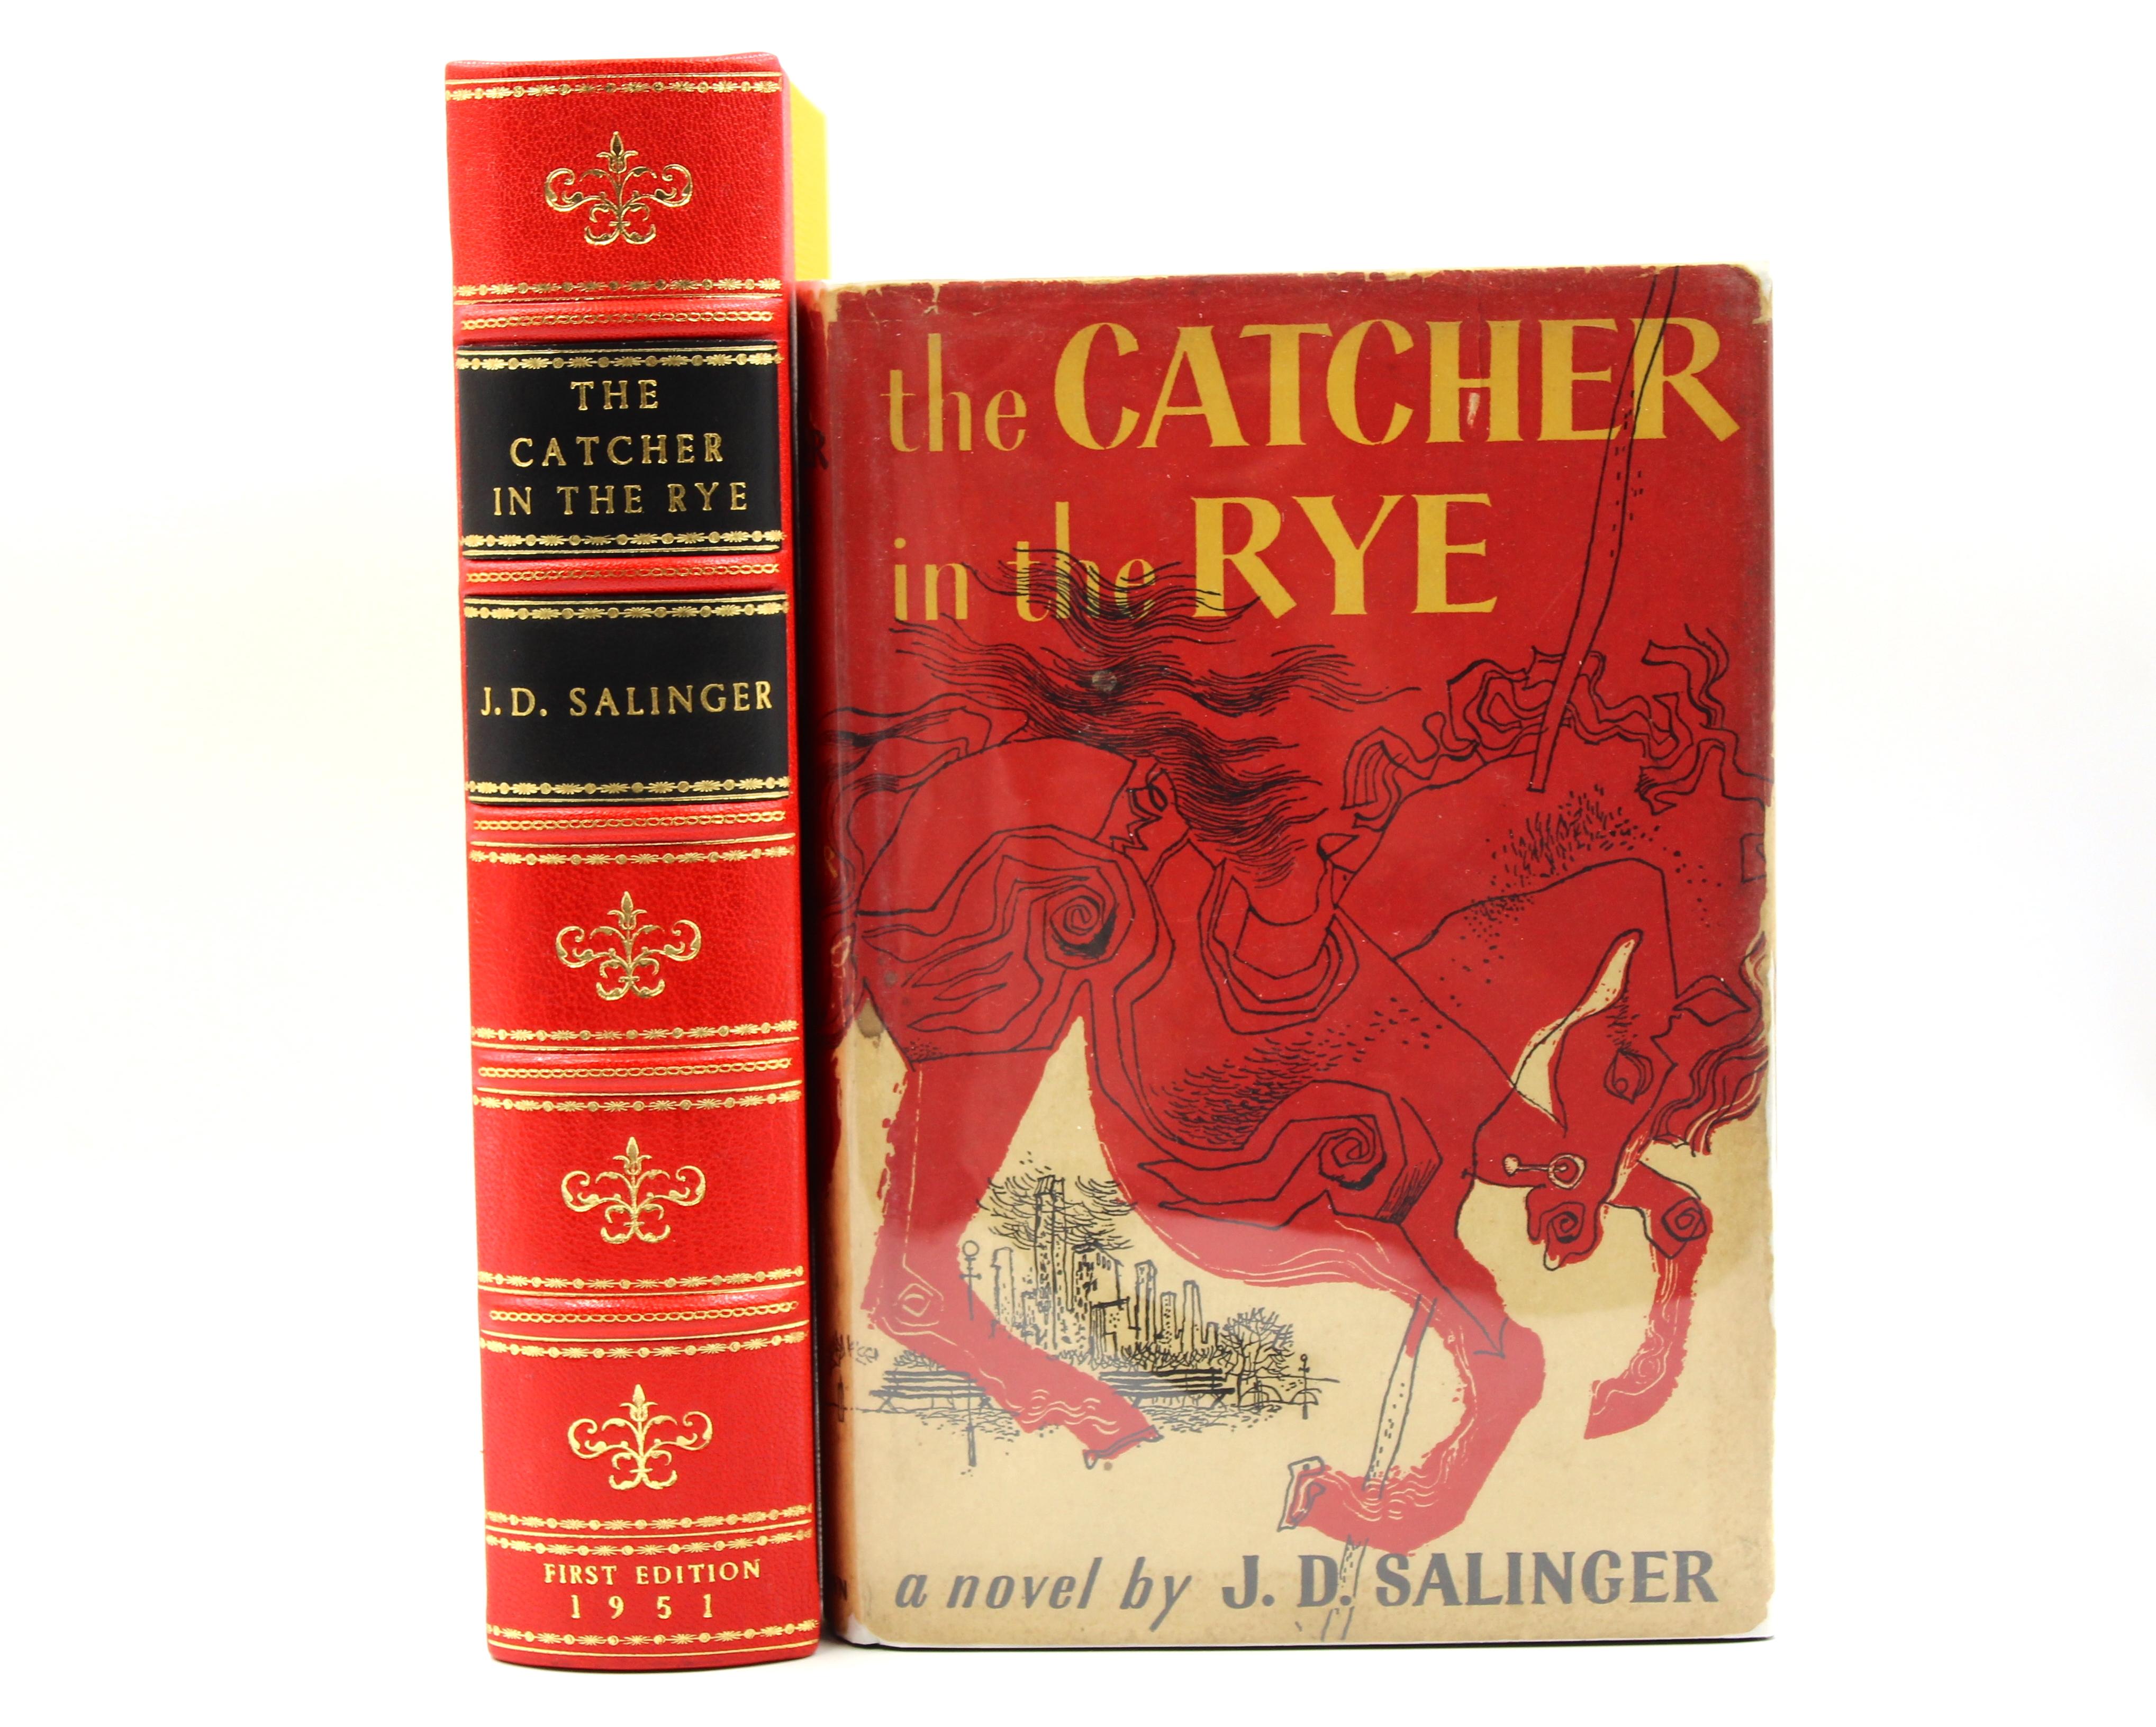 Catcher in the Rye by J.D. Salinger, First Edition, in Dust Jacket, 1951 2